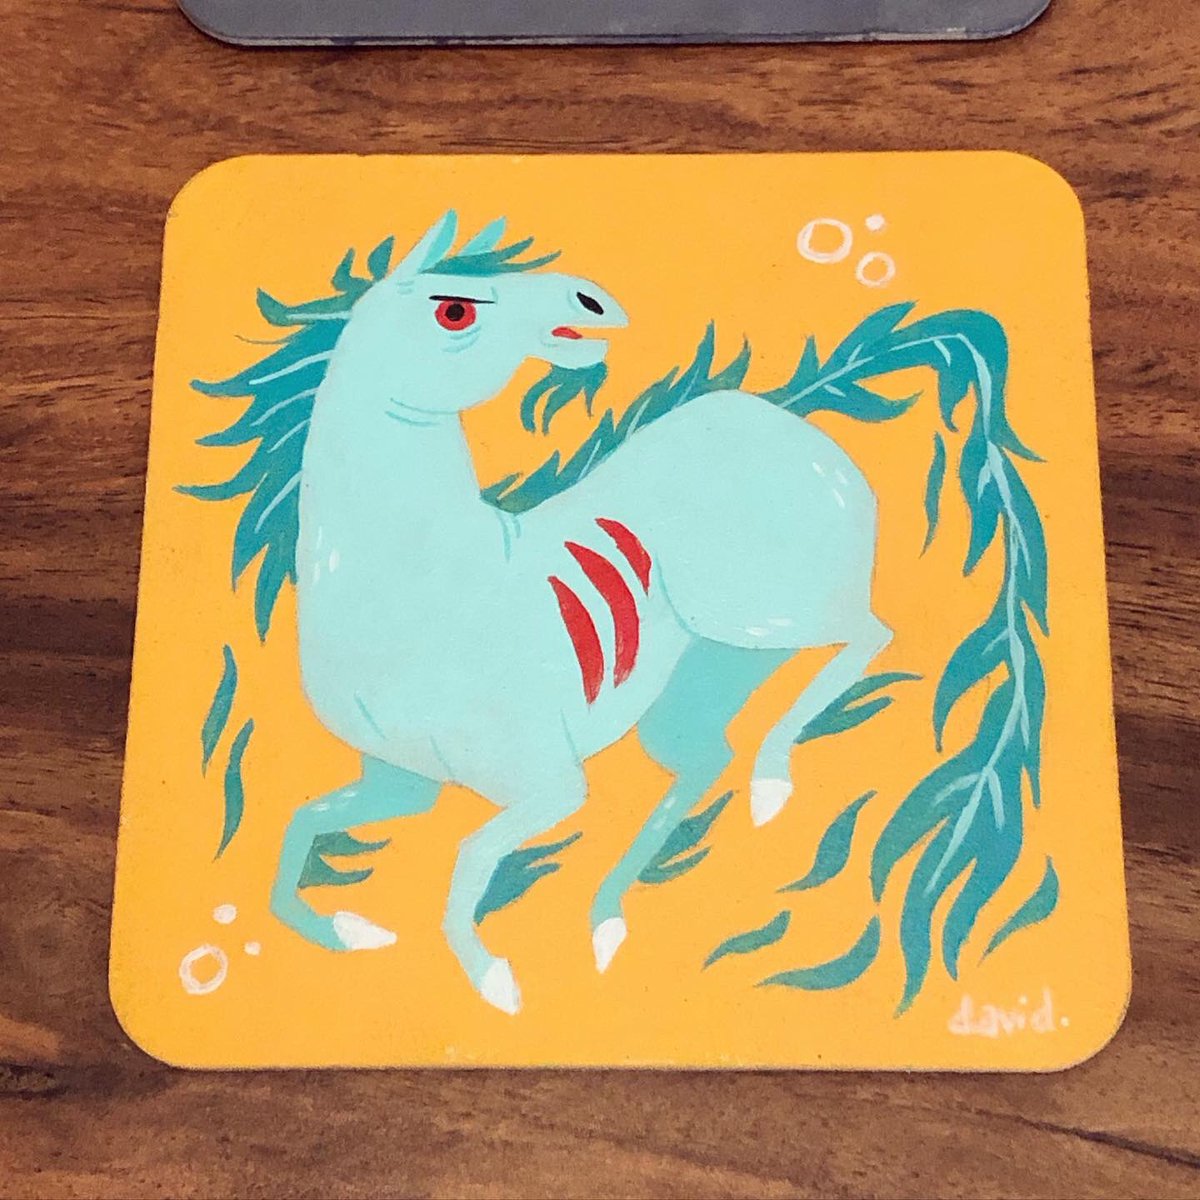 Spooky pony. The Kelpie is 2 out of 4 traditionally painted coasters done for @gallerynucleus's #salut4 show! 